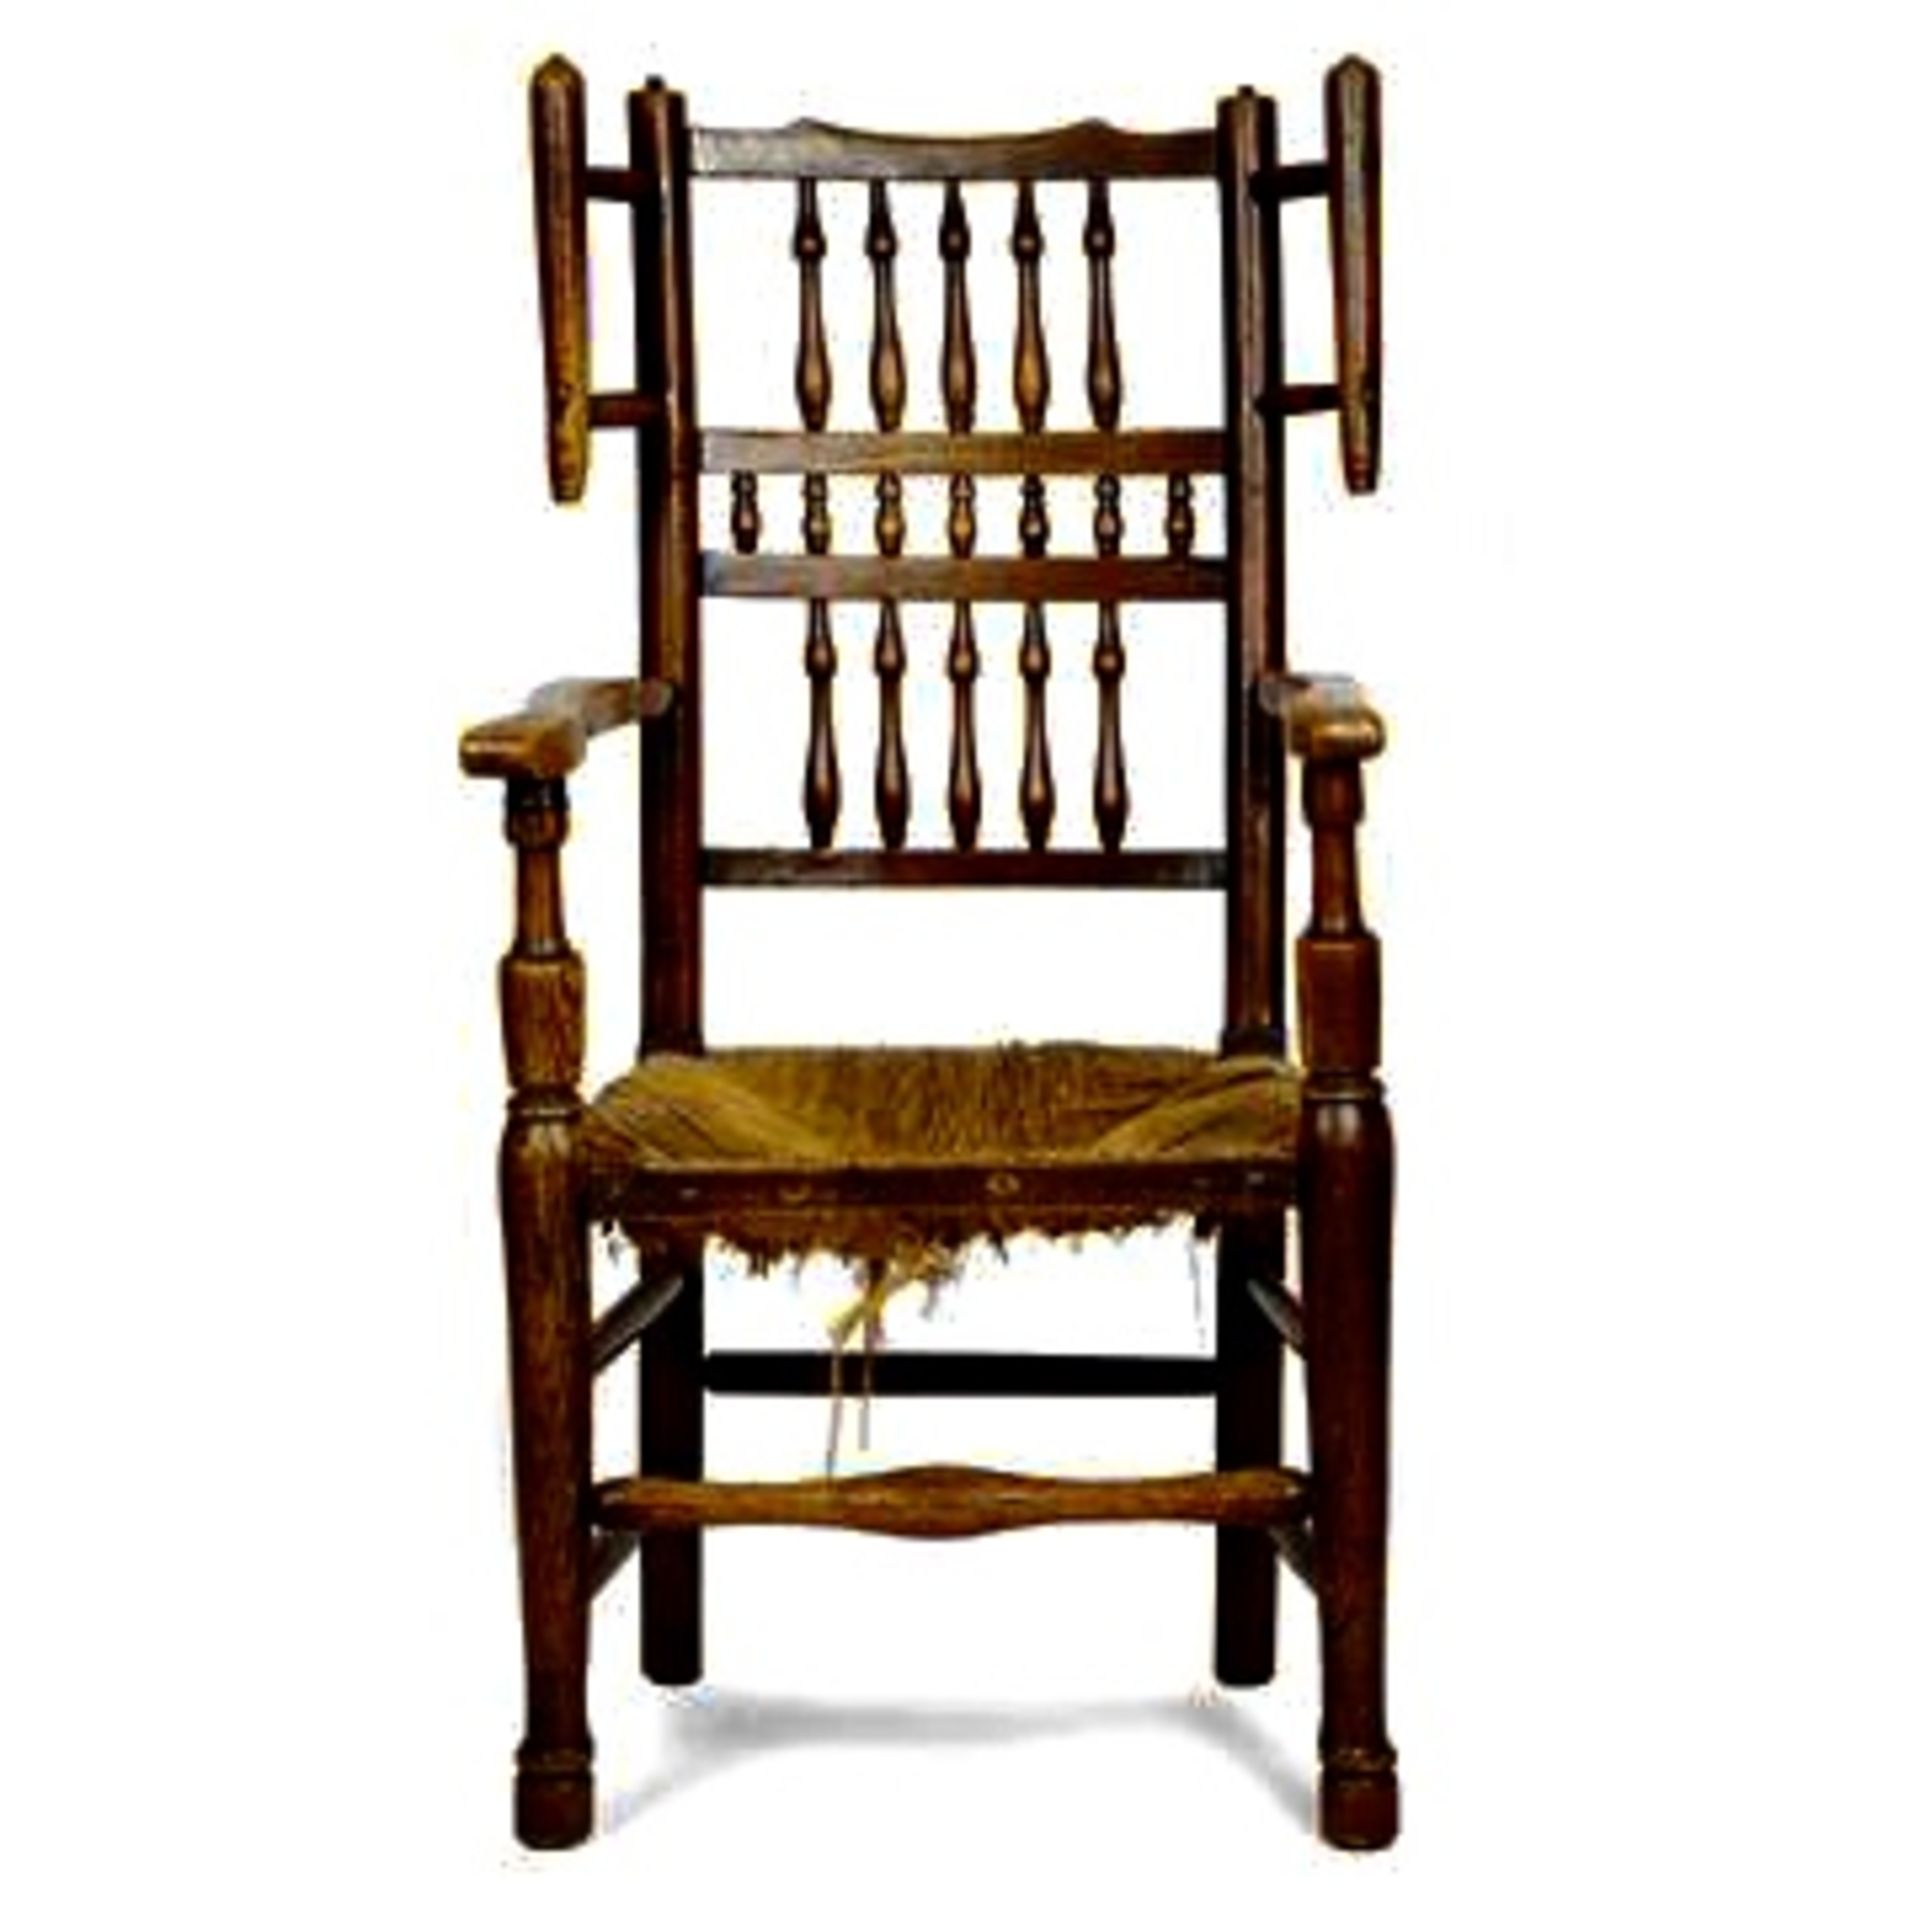 A 19TH CENTURY PROVINCIAL (LANCASHIRE) SPINDLE BACK ELBOW CHAIR